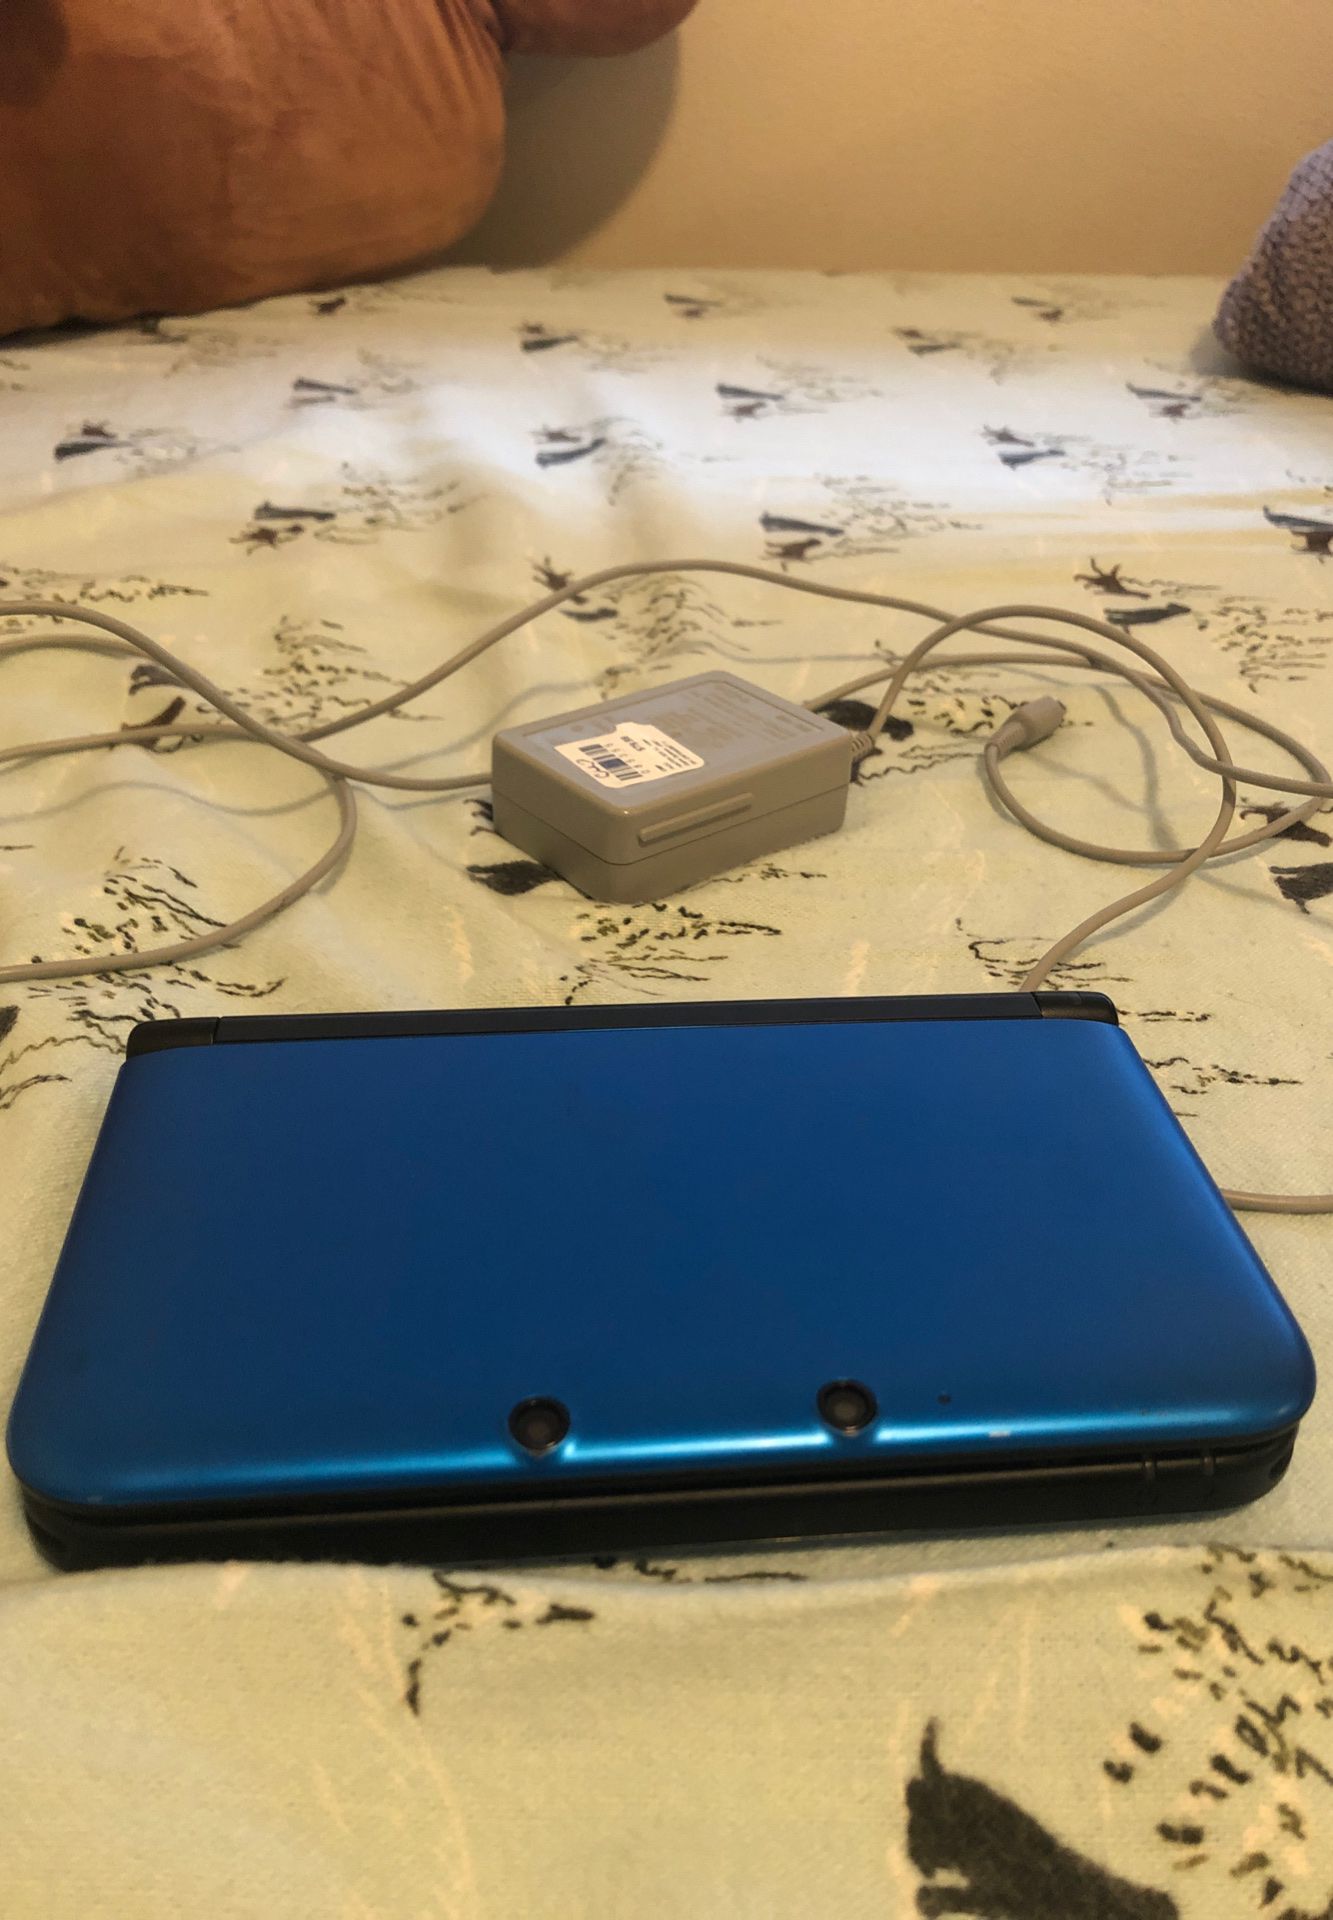 Nintendo 3DS XL comes with Pokémon game